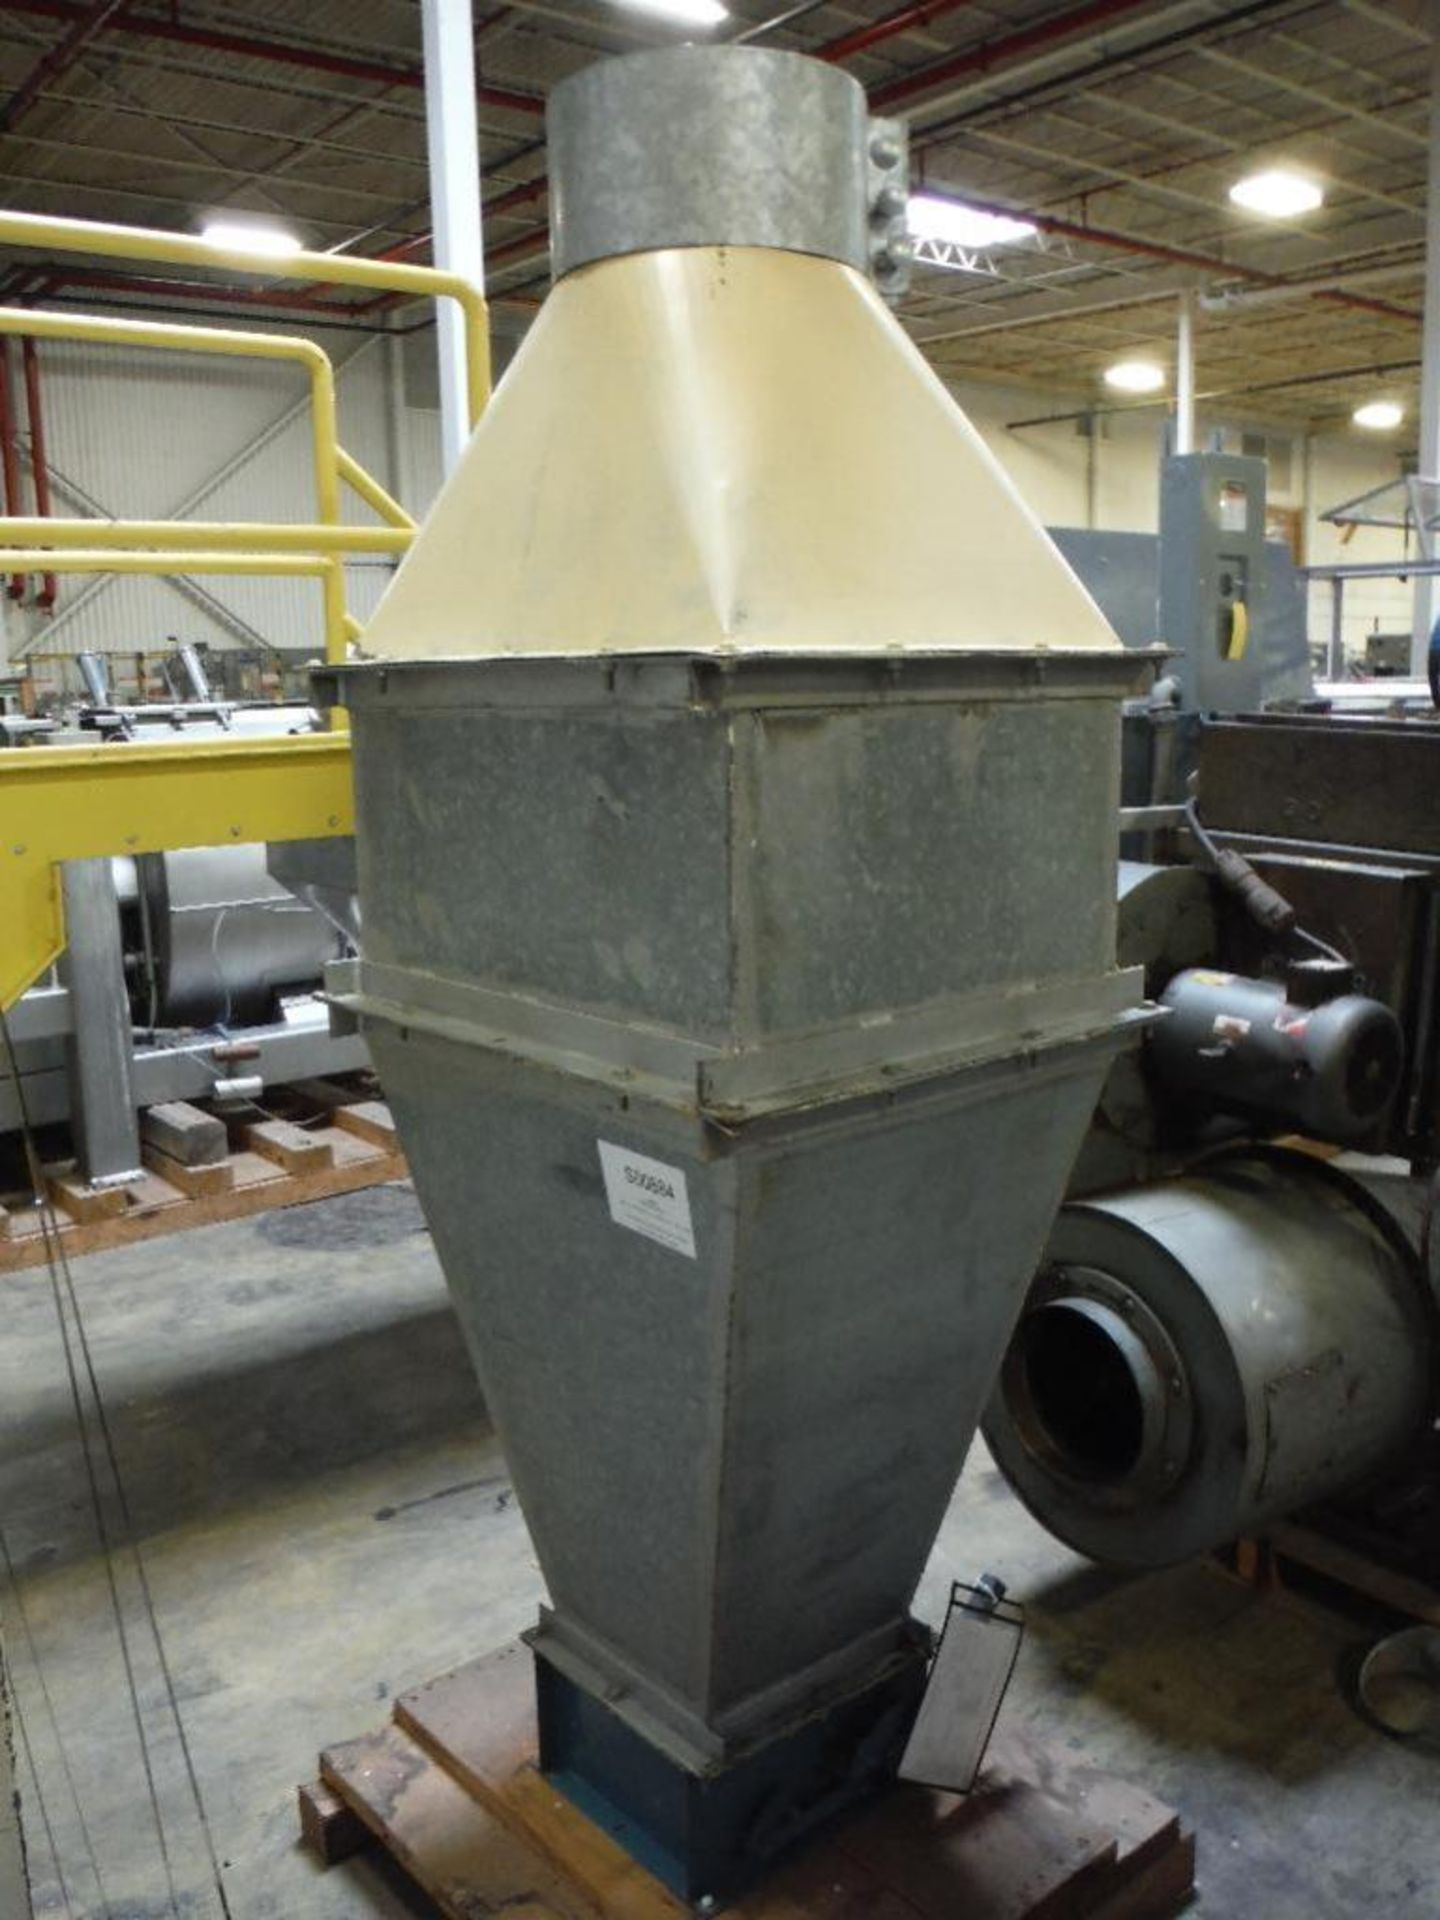 Aeroacoustic dust collector hood with gate valve ** Rigging Fee: $25 ** - Image 2 of 6